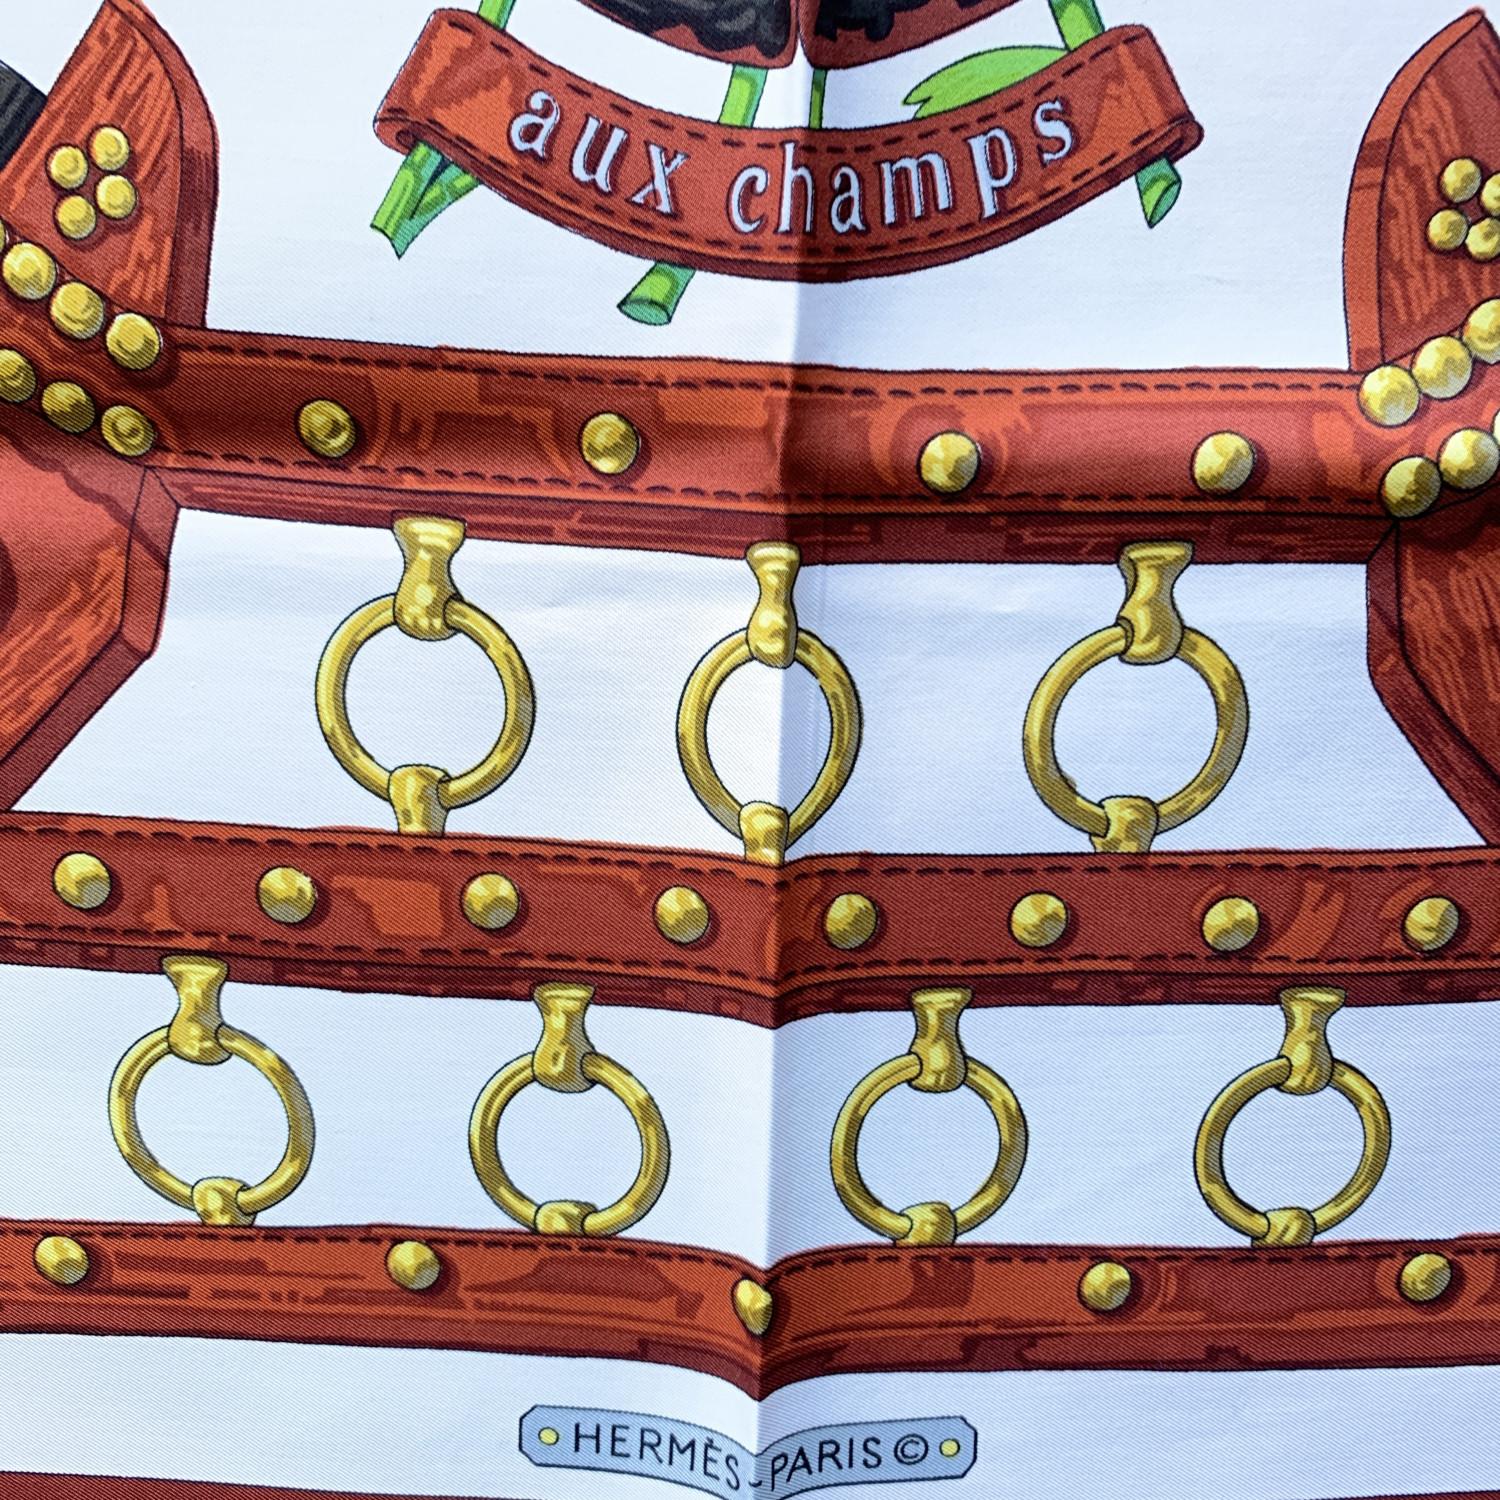 Hermes Paris Vintage Brown Silk Scarf Aux Champs 1970 Cathy Latham In Excellent Condition For Sale In Rome, Rome